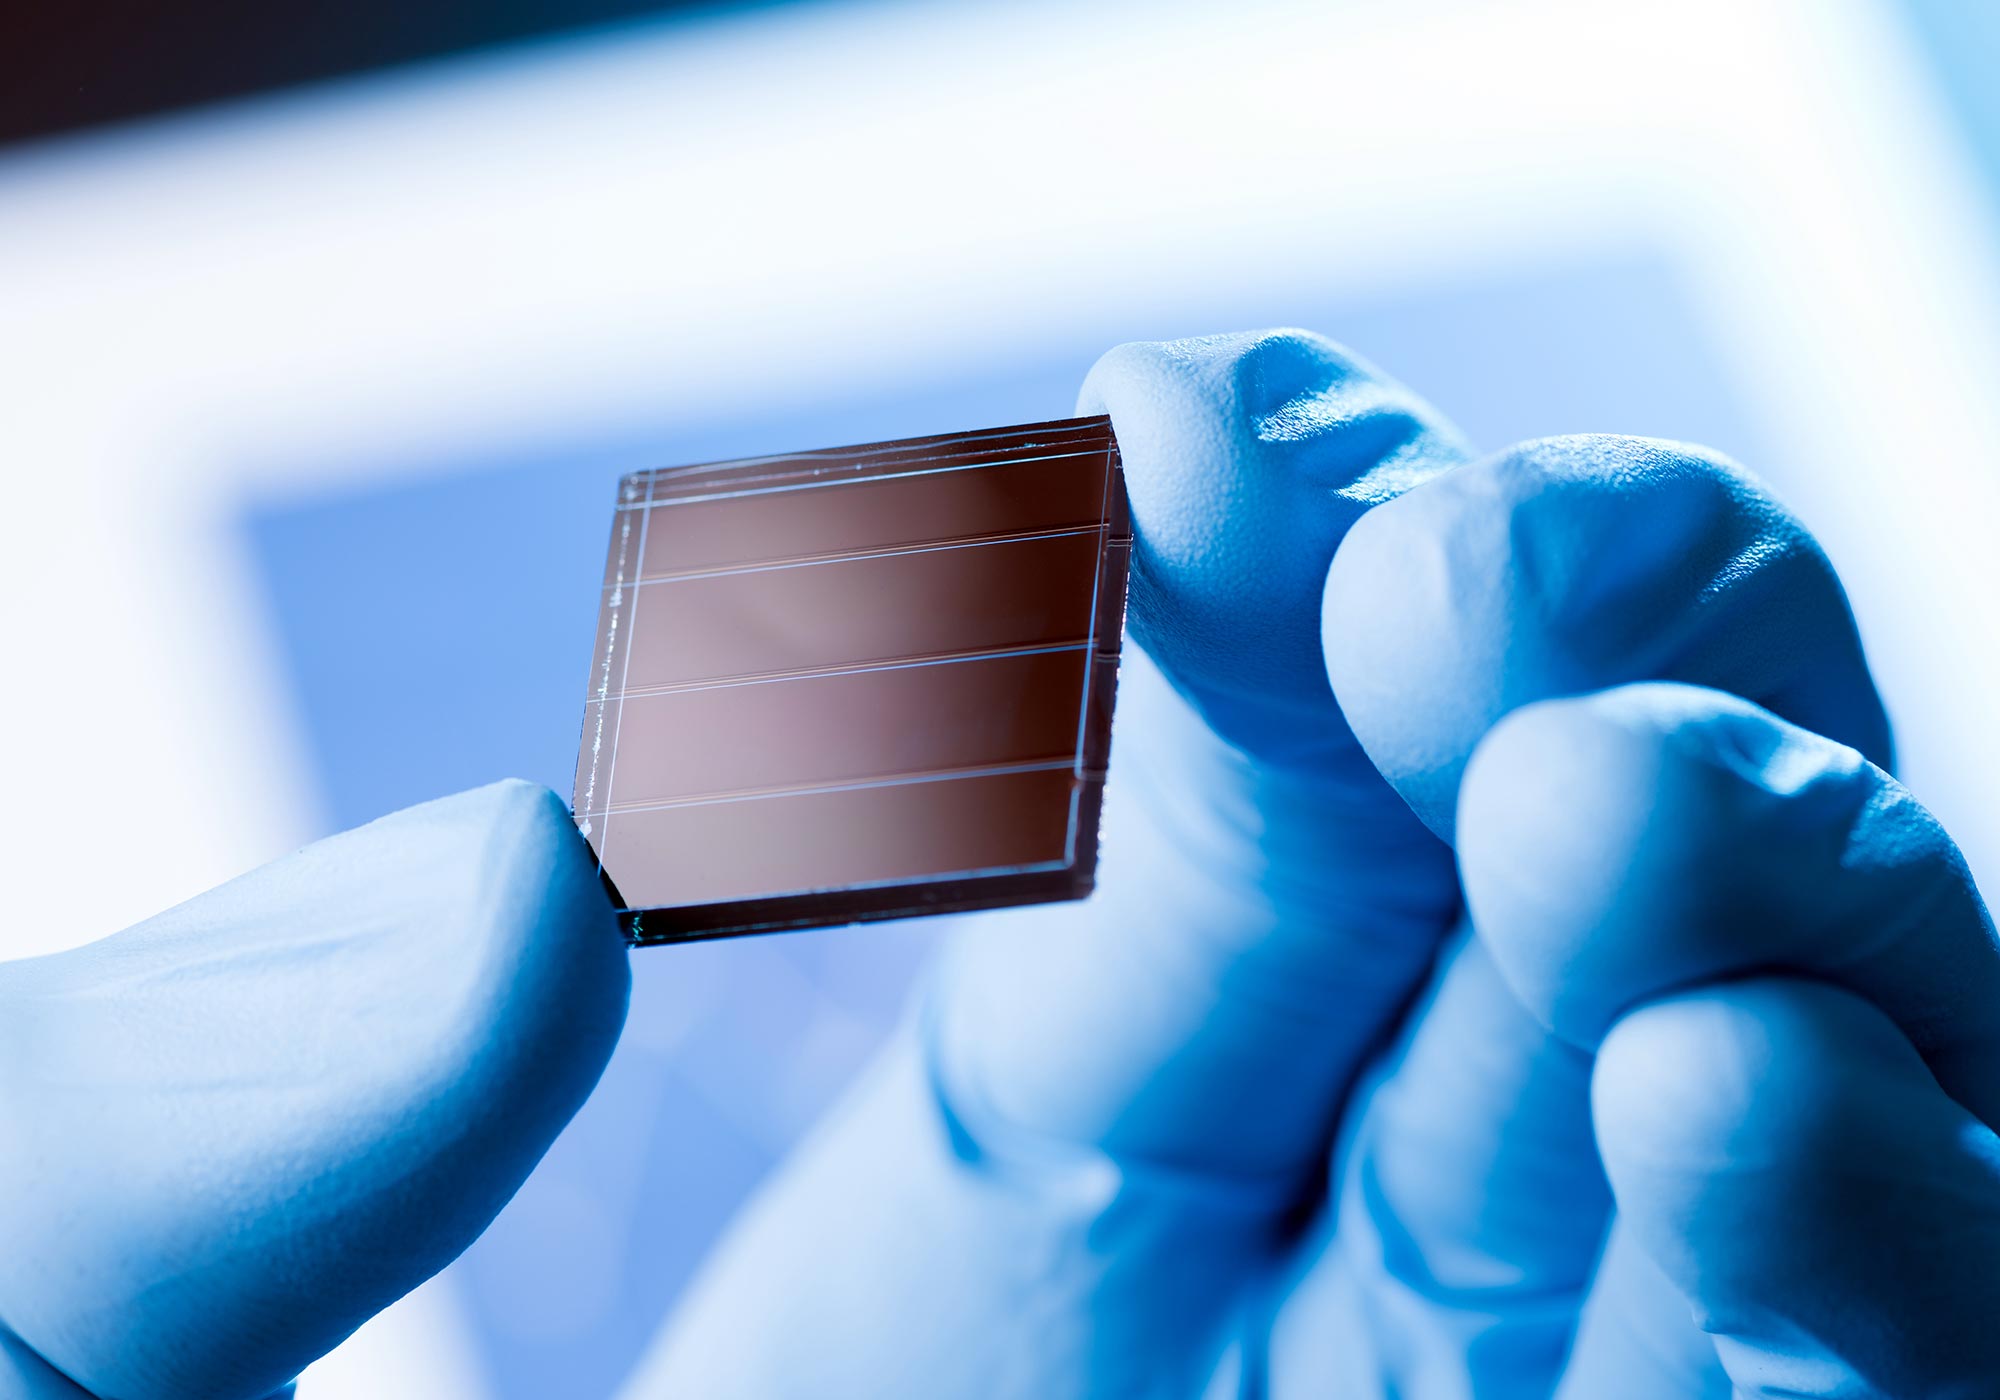 Physicists Develop New Significantly More Efficient Solar Cell